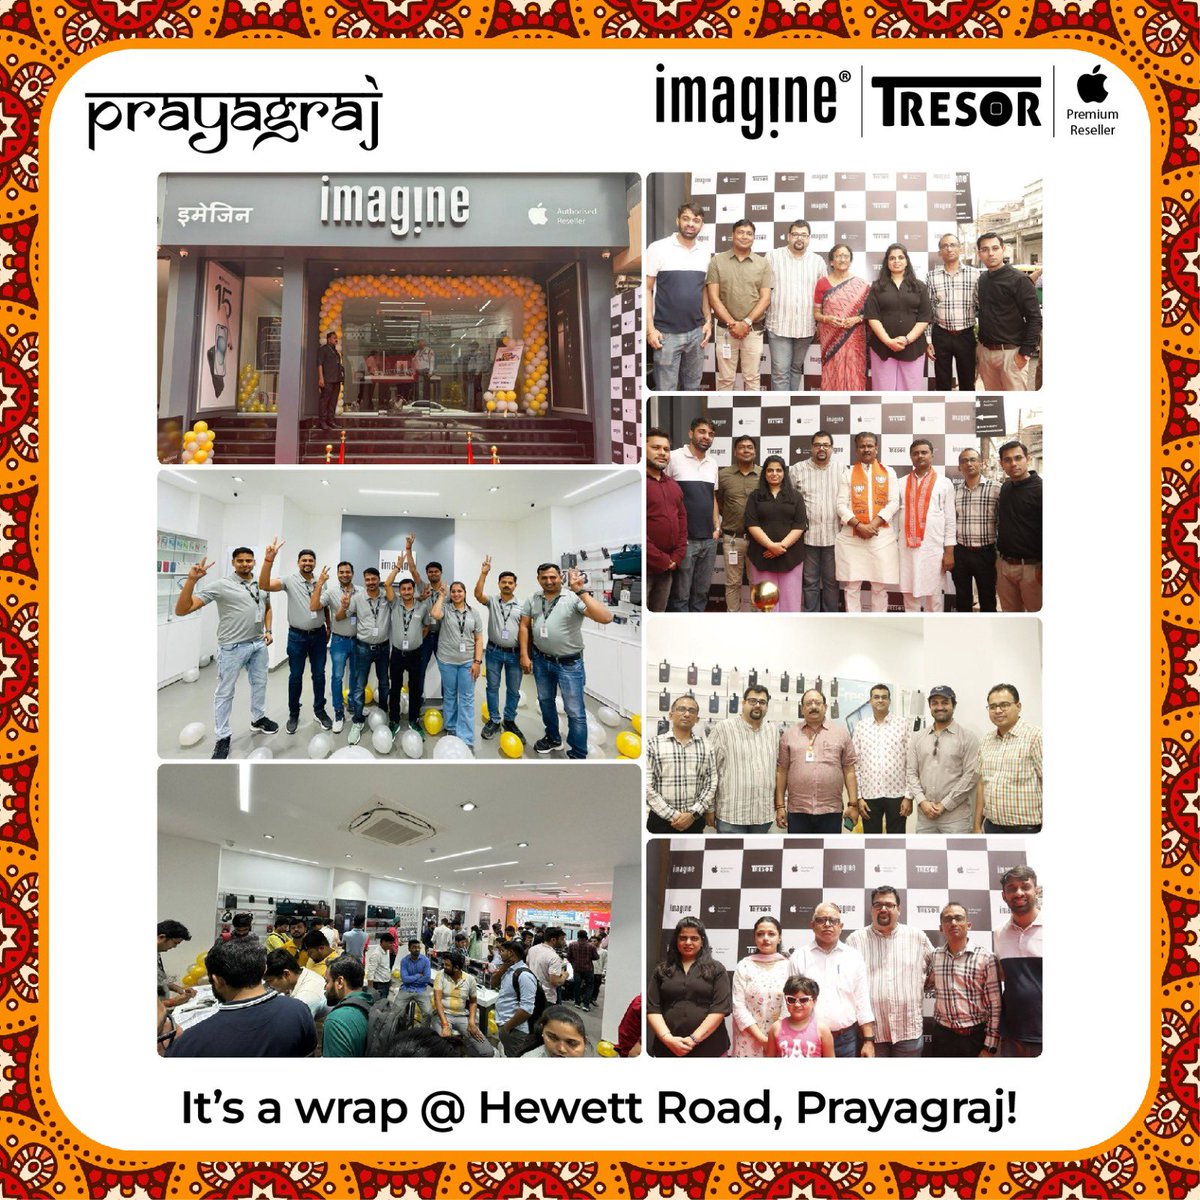 Prayagraj, what an incredible journey! A sincere thank you to our esteemed guests and valued customers for making the grand opening of our brand-new store on Hewett Road truly unforgettable! 🎉🙏 Your presence brought immense joy to this momentous occasion, and we're thrilled to